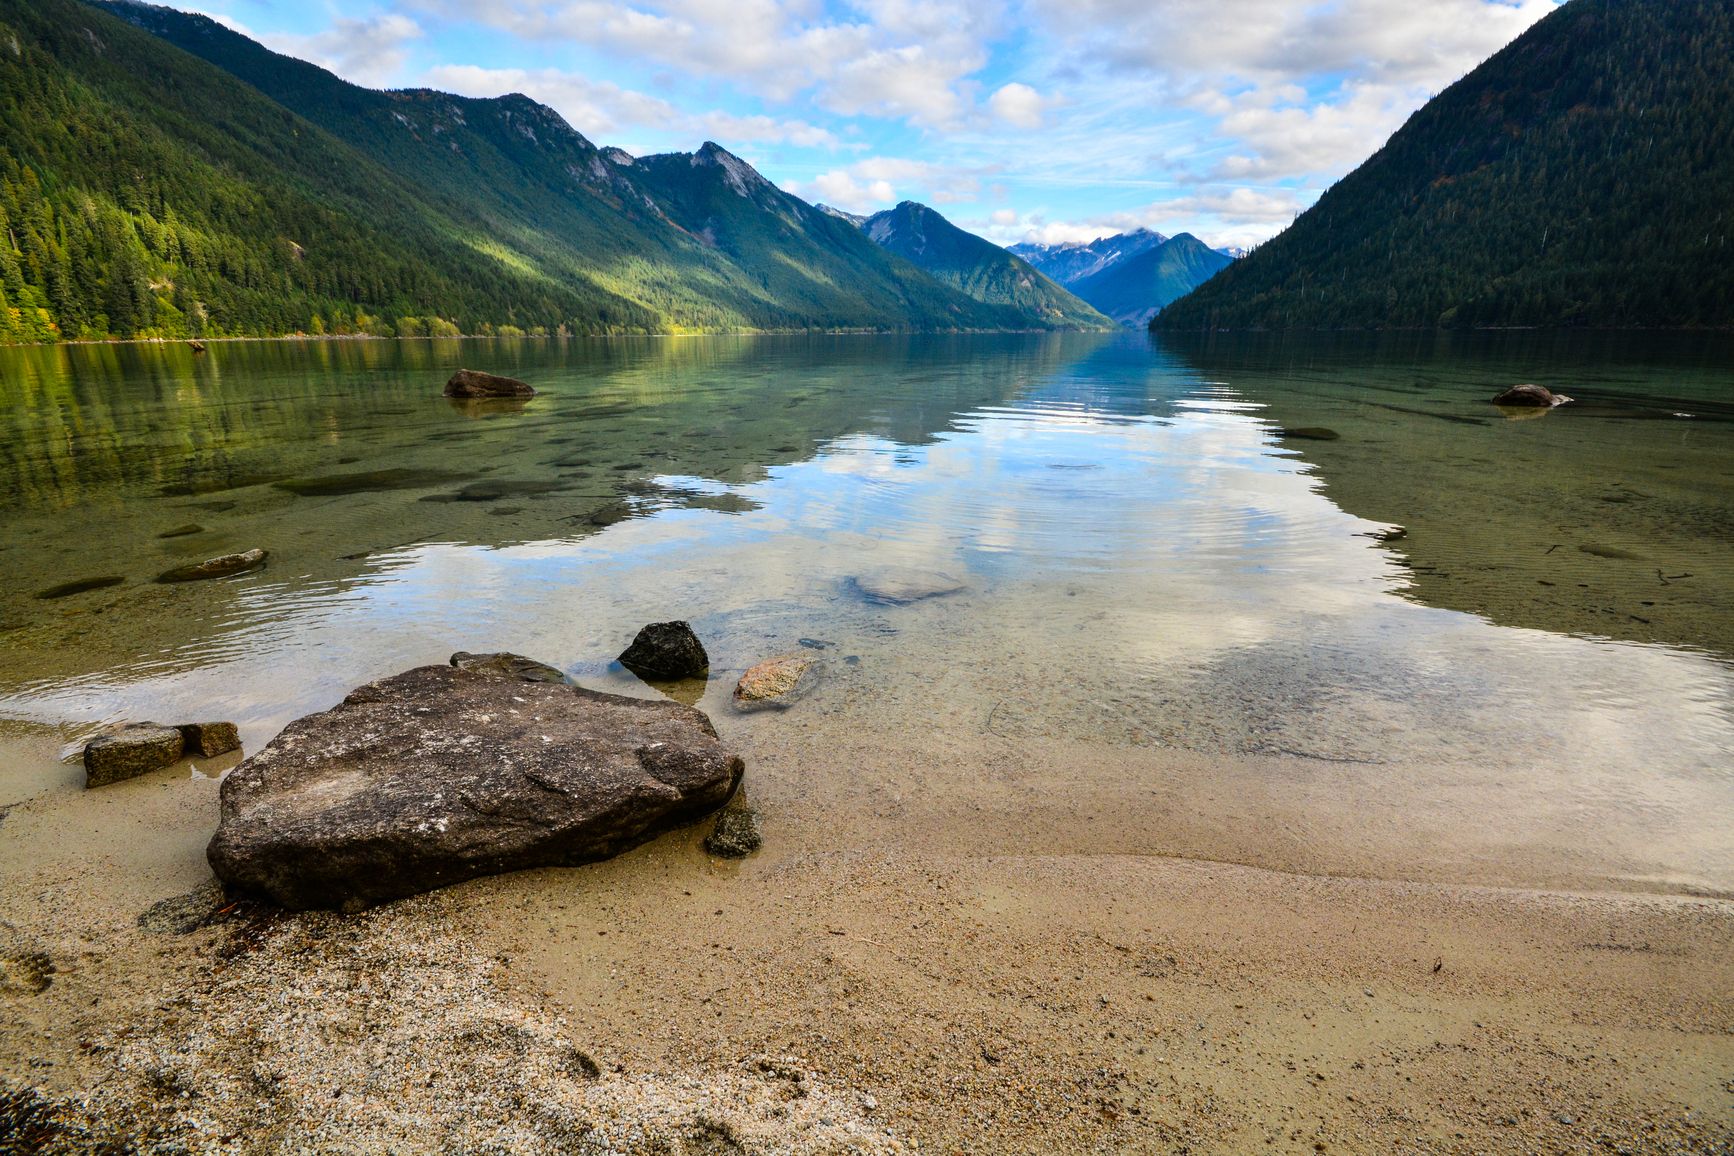 A beach in Sx̱ótsaqel/Chilliwack Lake Park offers a view of forest-covered mountains surrounding the lake.